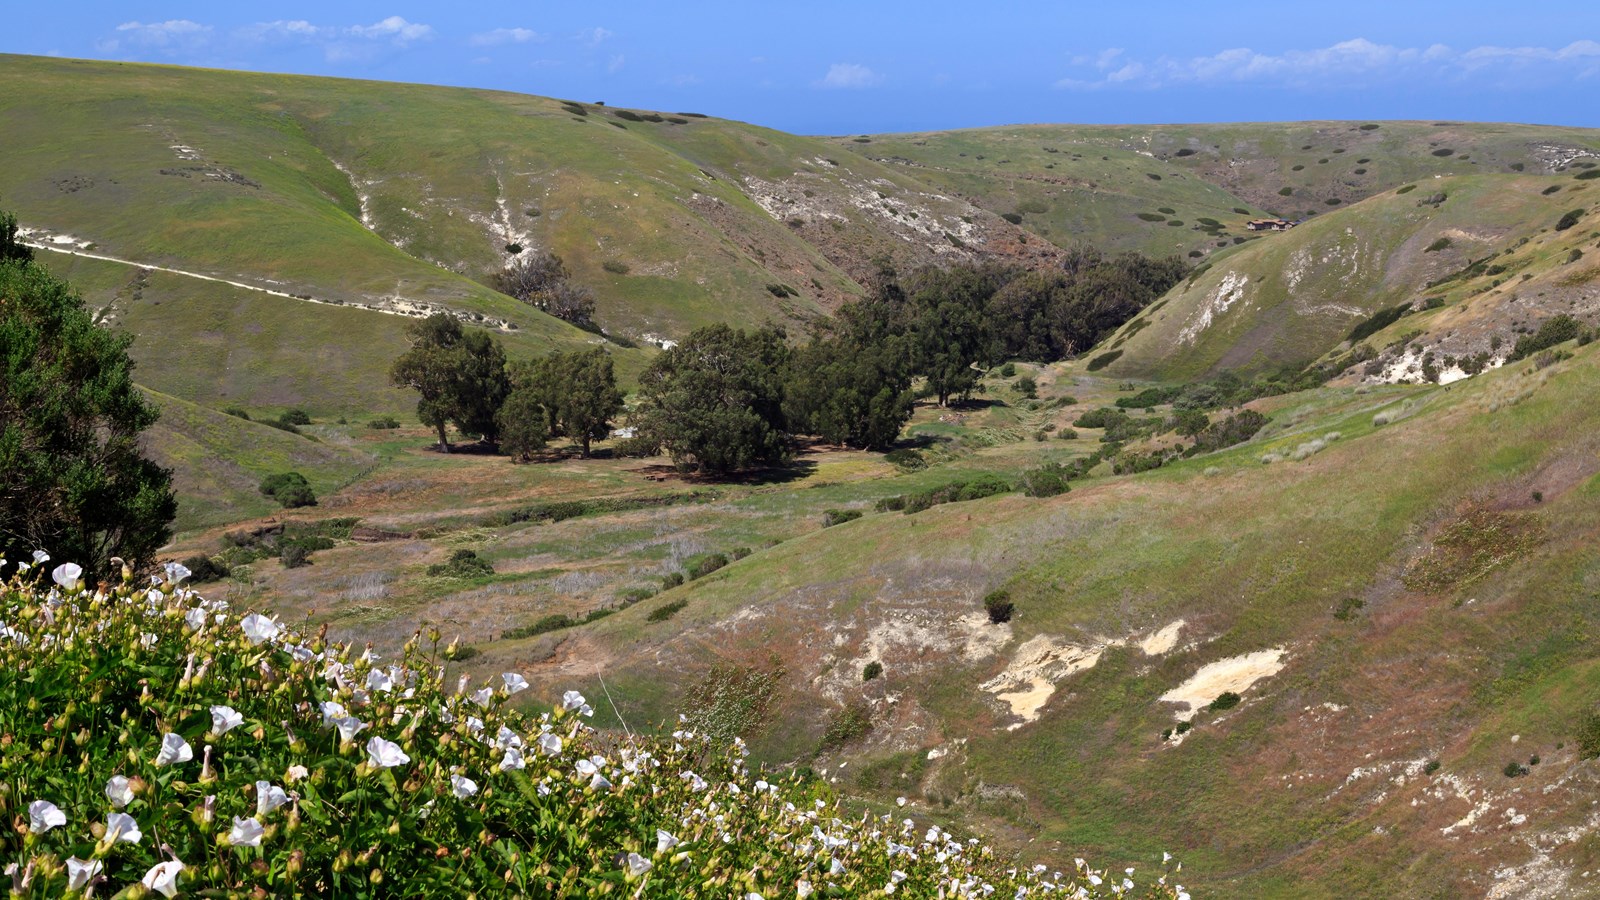 White flowers with green leaves surrounded be greenish brown grass with valley below.